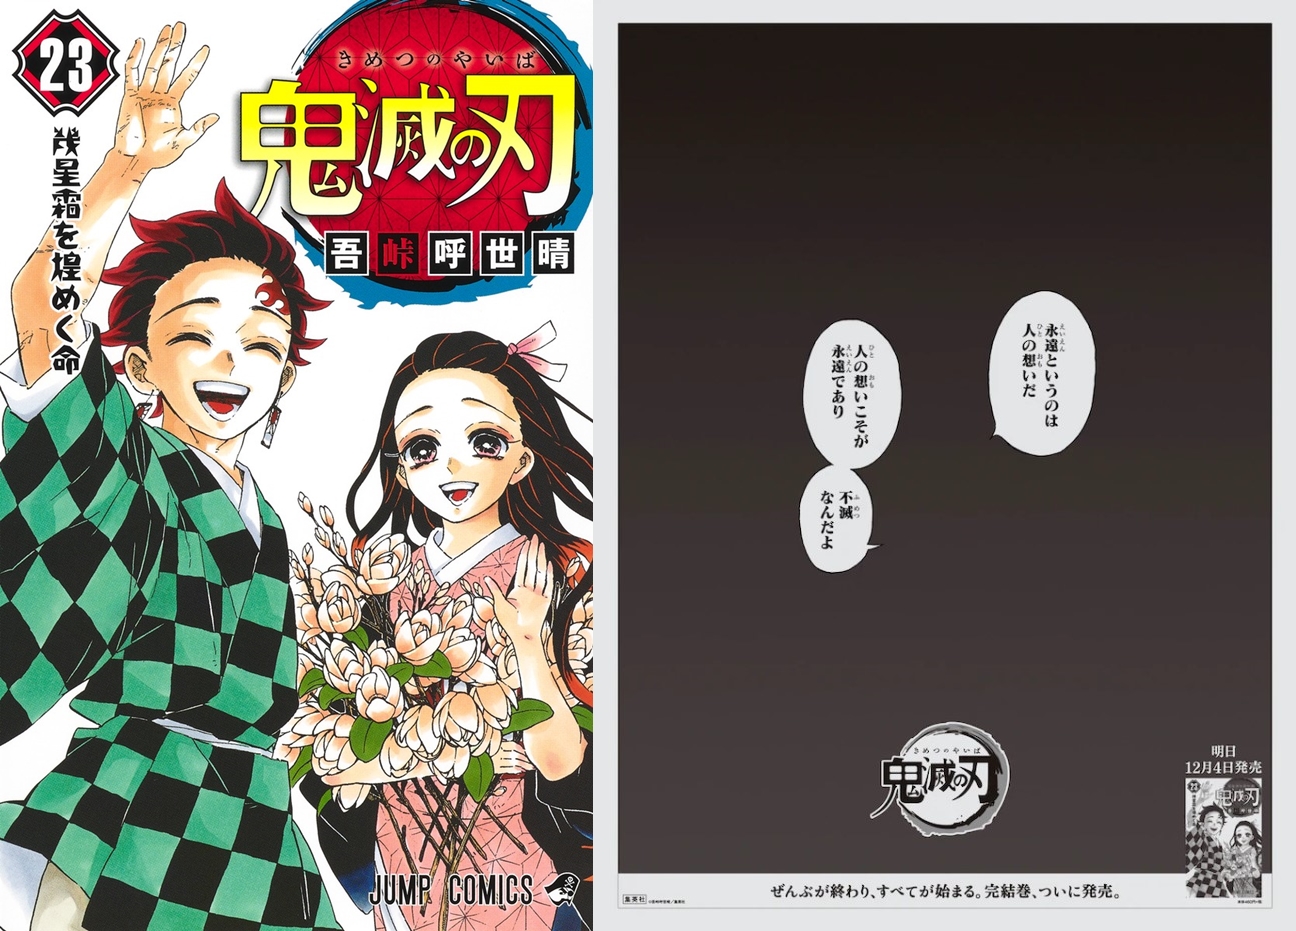 Demon Slayer Final Volume to Be Advertised in National Newspapers